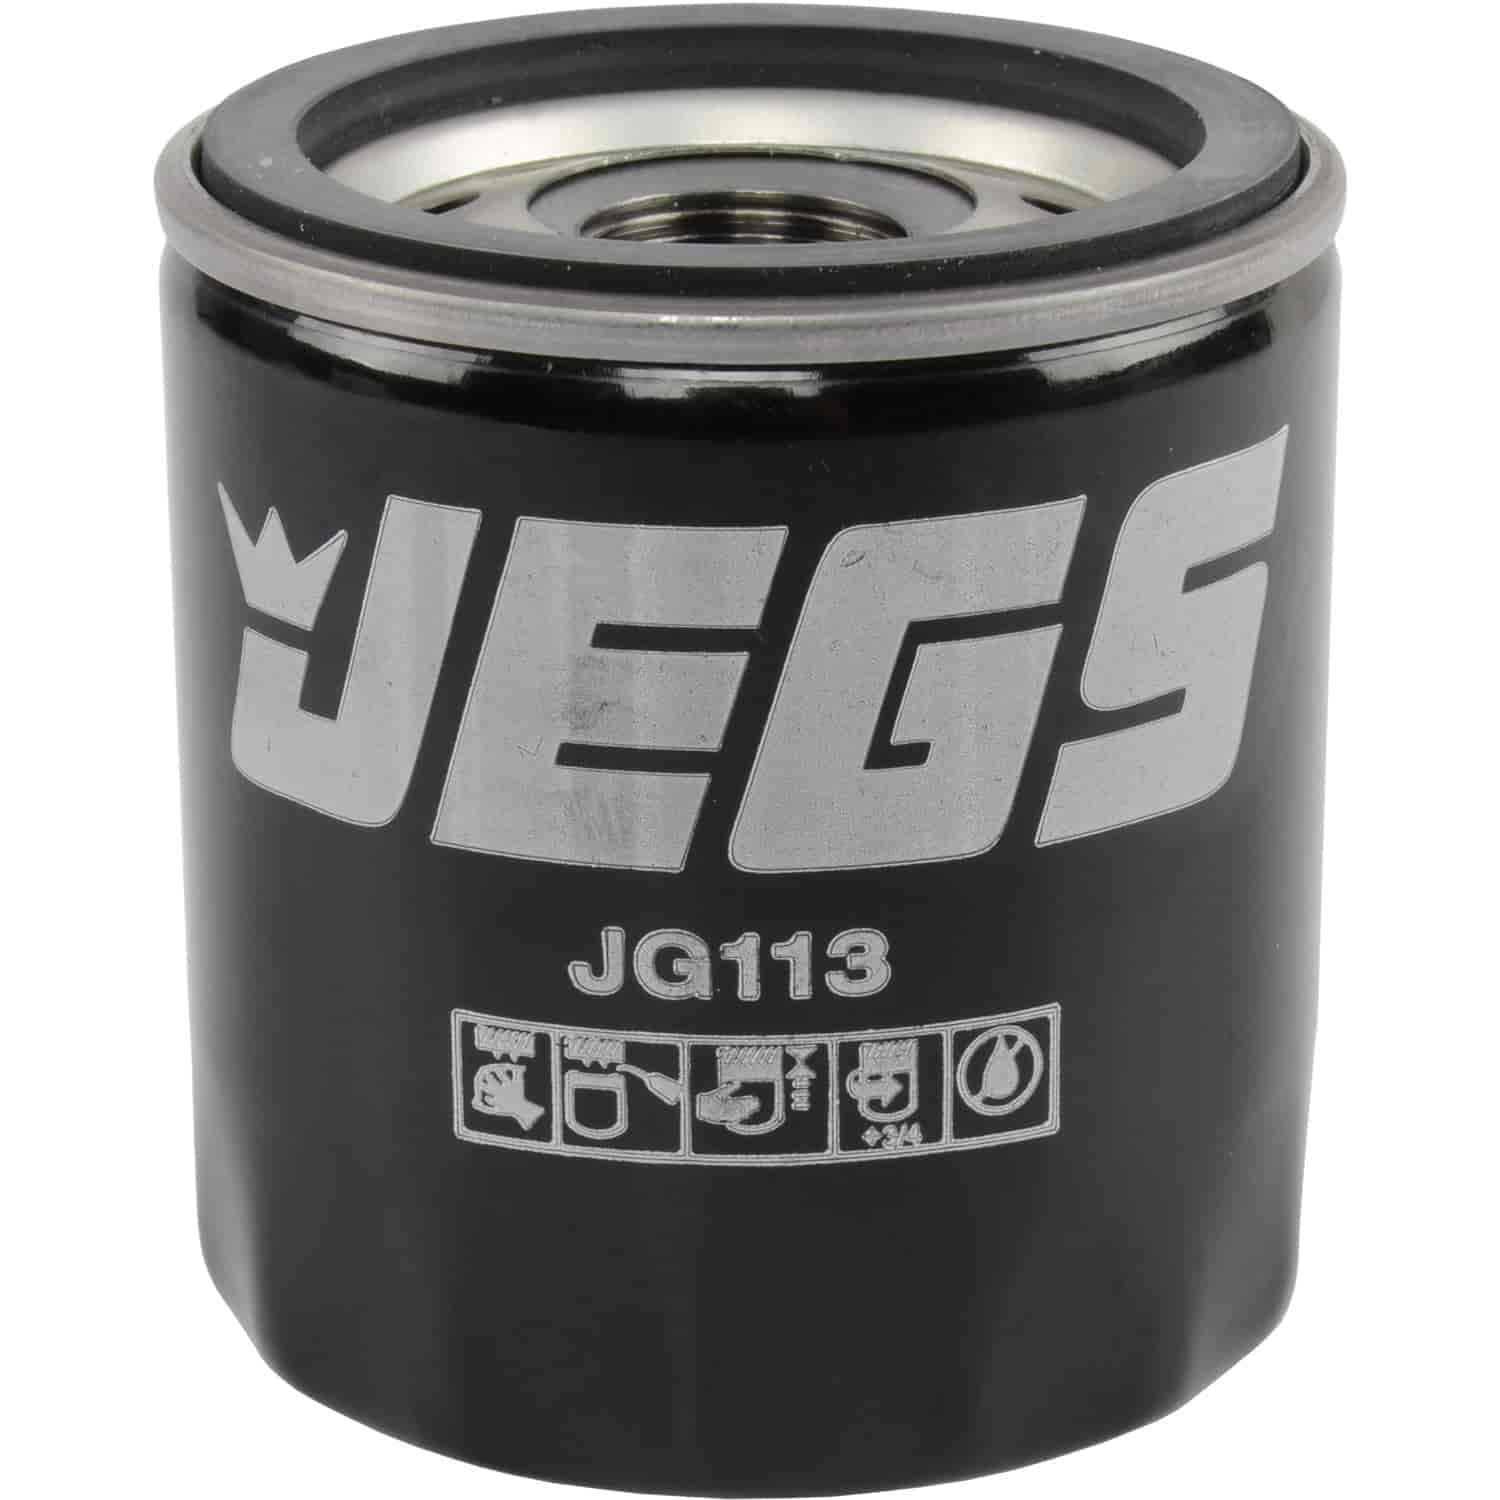 Performance GM, Dodge Oil Filter, 3.35 in. High, 22mm x 1.5 Thread